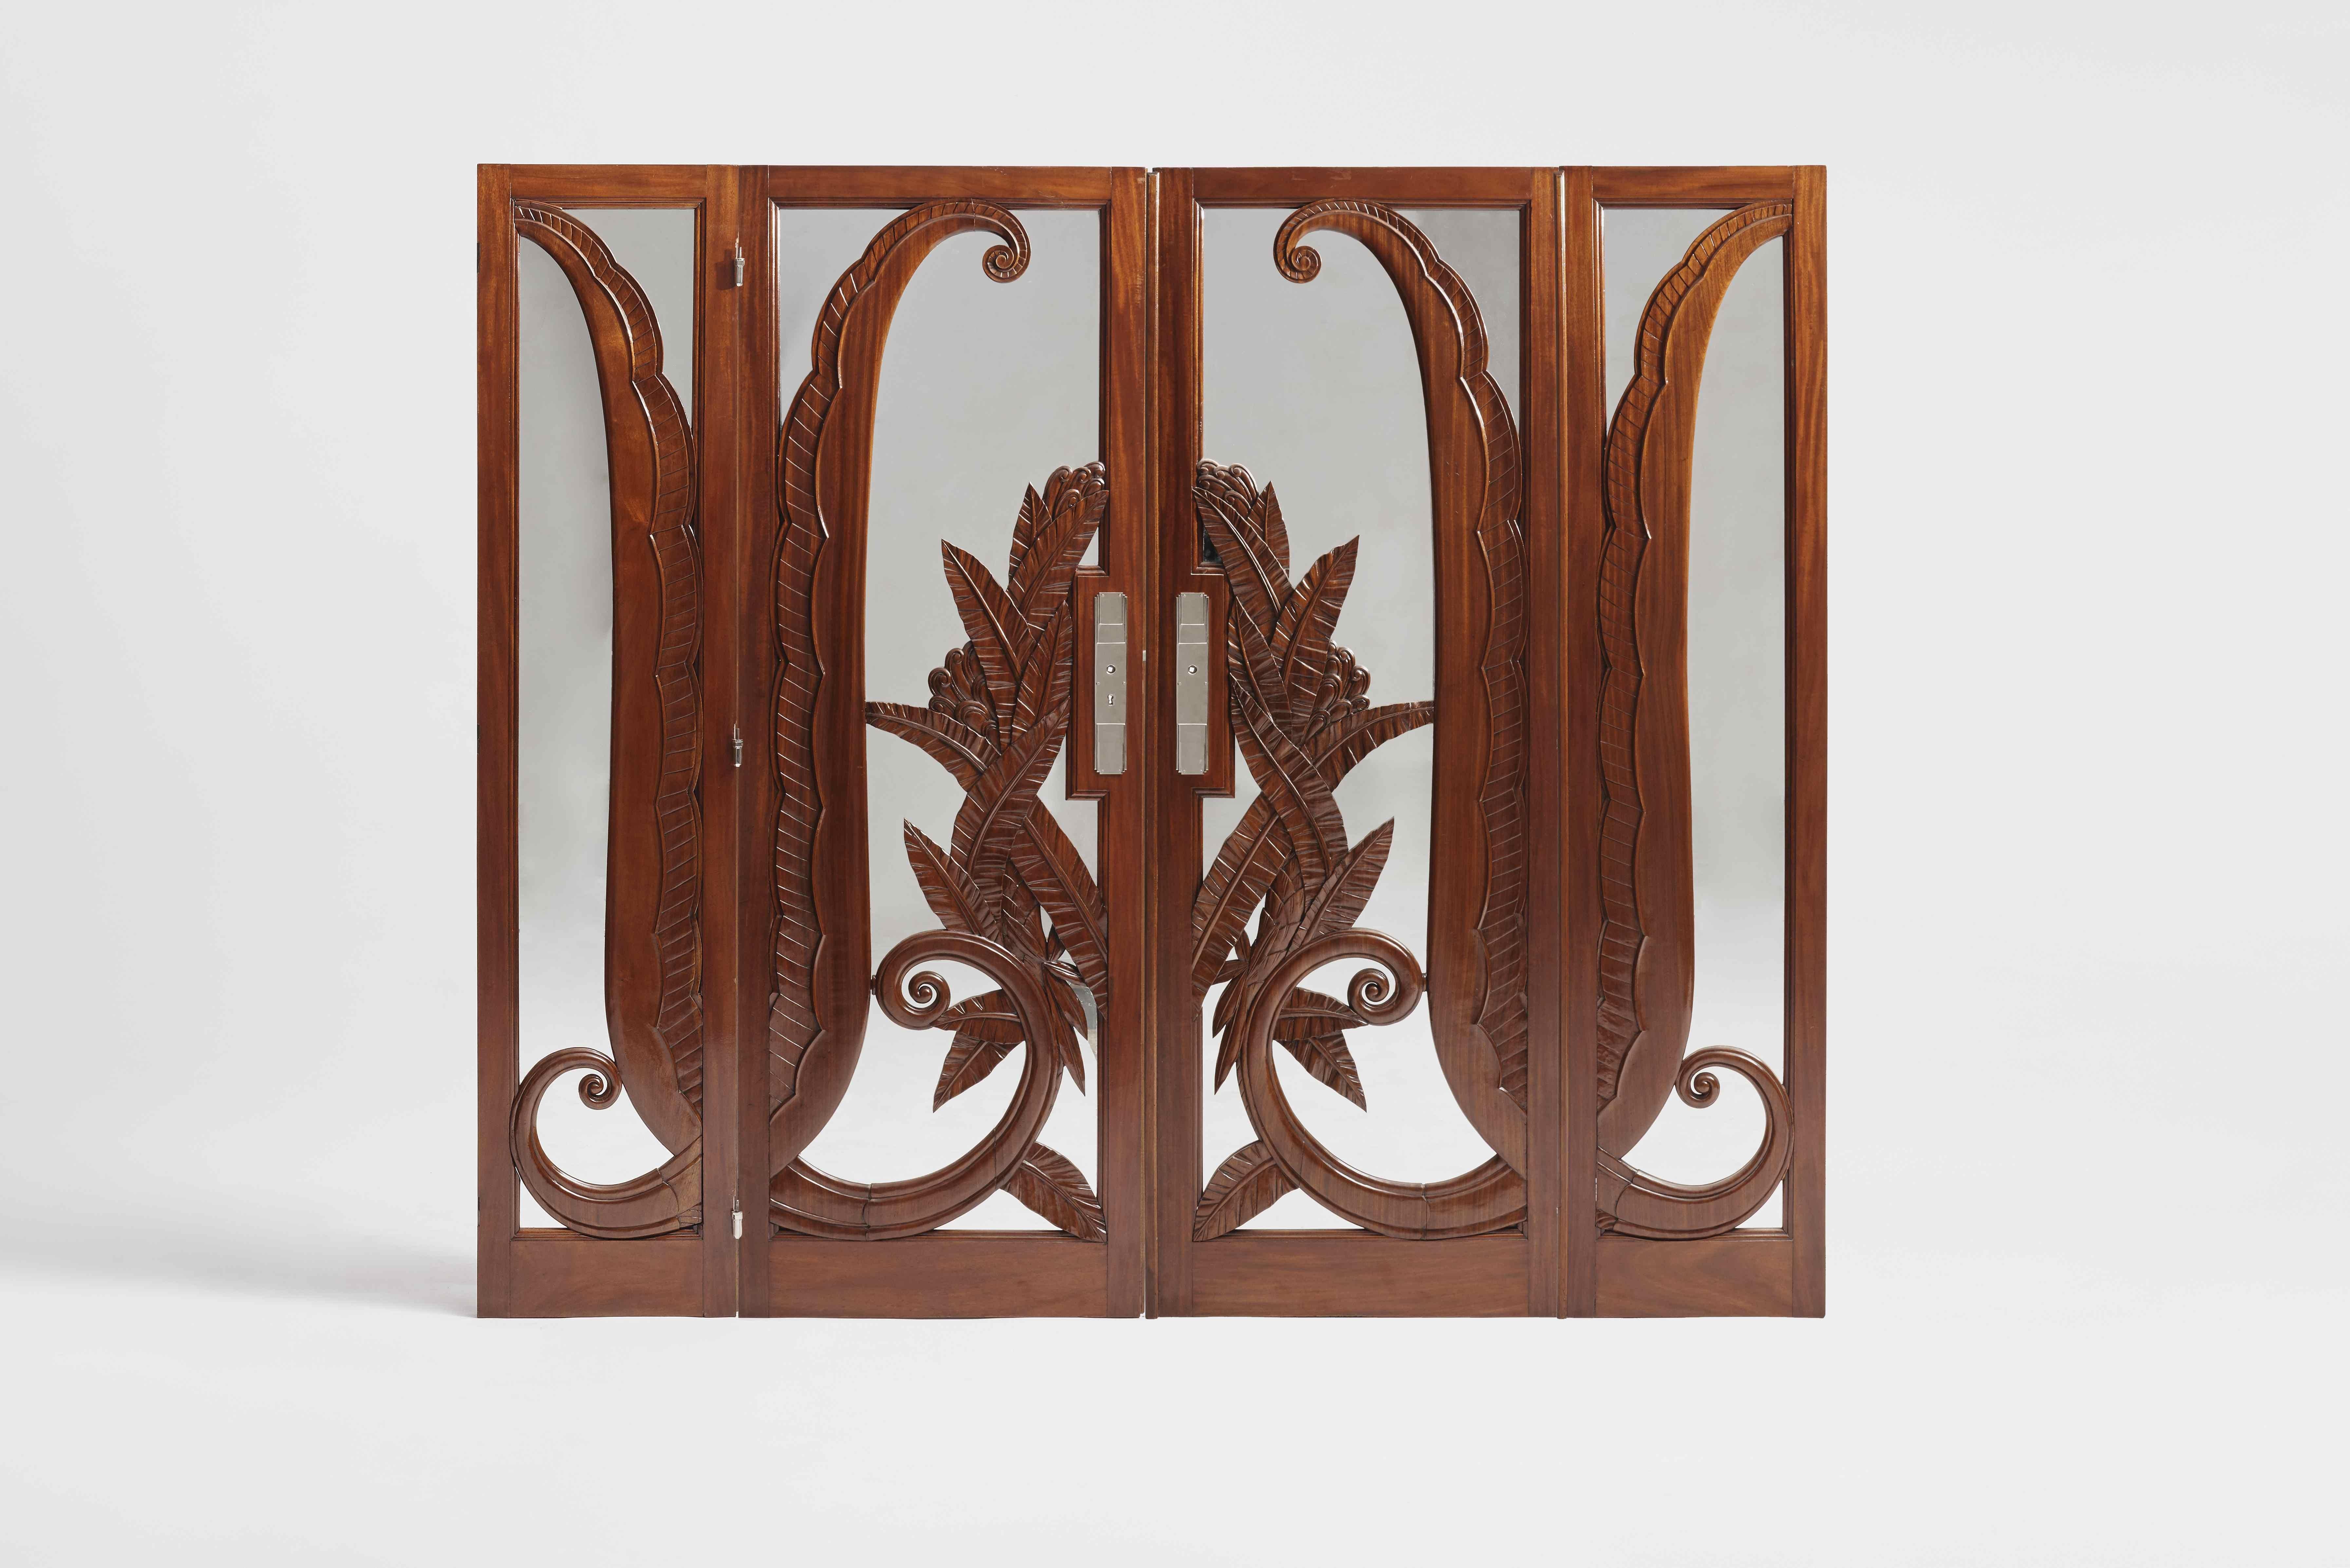 French Pair of Art Deco Mirrored and Carved Doors, Paul Moreau-Vauthier, France, 1926 For Sale